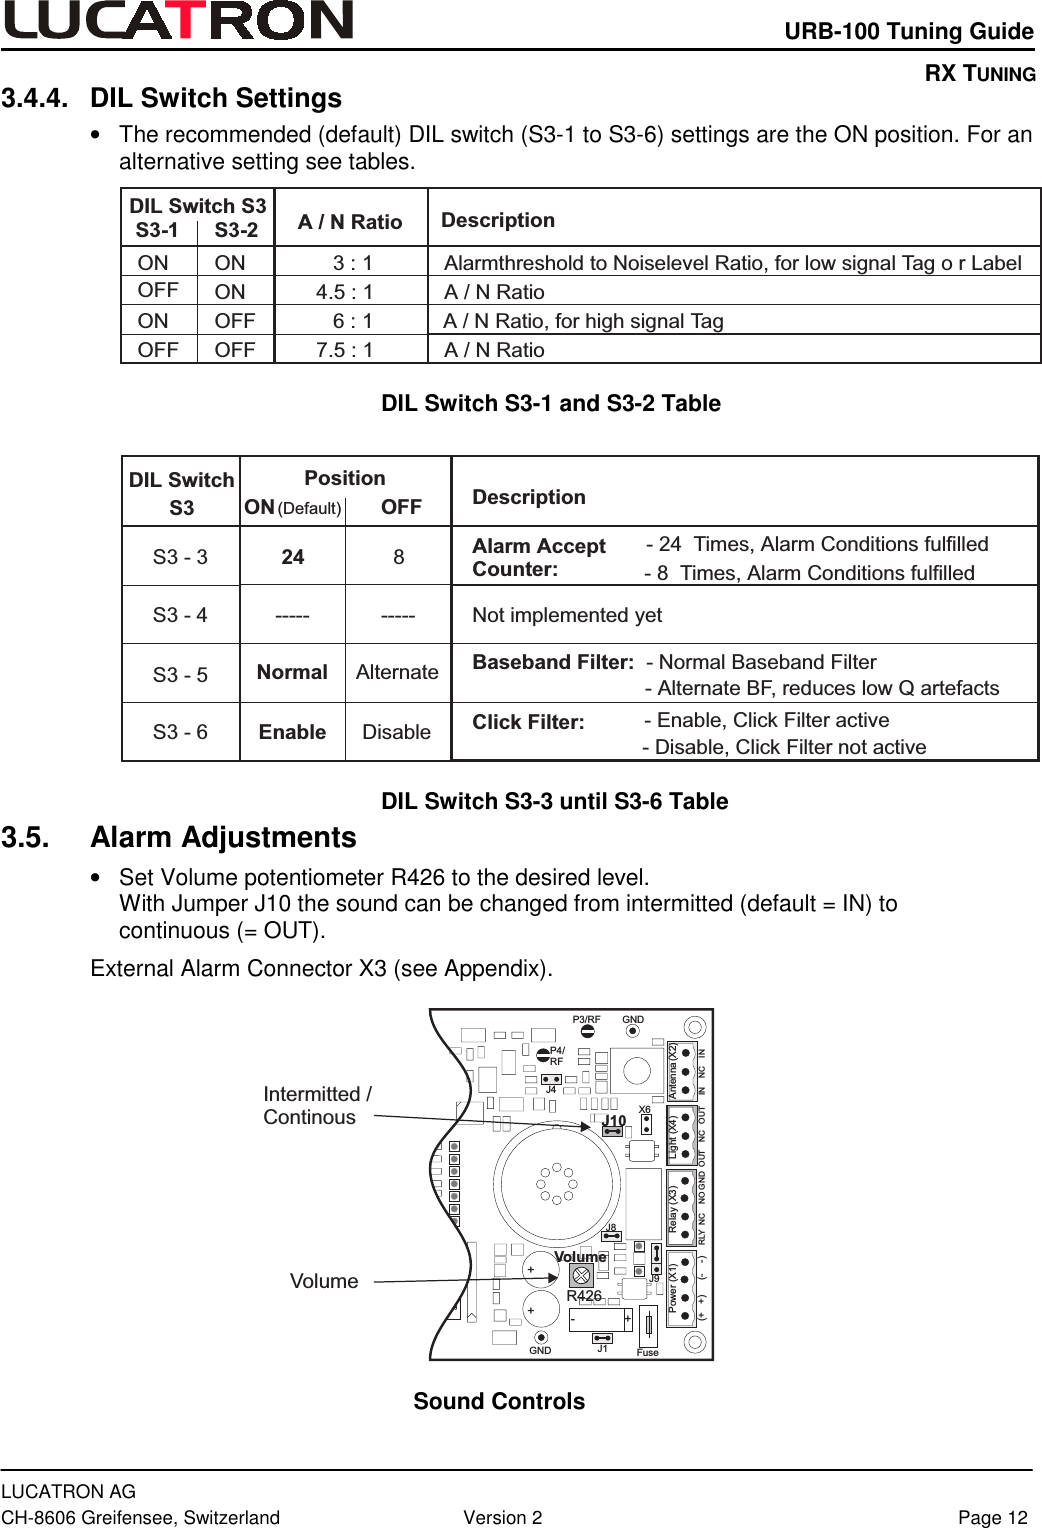    URB-100 Tuning Guide  LUCATRON AG CH-8606 Greifensee, Switzerland  Version 2  Page 12 3.4.4.  DIL Switch Settings •  The recommended (default) DIL switch (S3-1 to S3-6) settings are the ON position. For an alternative setting see tables. DIL Switch S3S3-1 S3-2 DescriptionONA / N RatioAlarmthreshold to Noiselevel Ratio, for low signal Tag o r LabelA / N Ratio, for high signal TagOFFONONOFF OFFOFFON3:14.5 : 16:17.5 : 1A / N RatioA / N Ratio   DIL Switch S3-1 and S3-2 Table S3-3S3-624 8Enable DisableS3-5 Normal Alternate Baseband Filter: - Normal Baseband Filter- Alternate BF, reduces low Q artefactsAlarm AcceptCounter:PositionON (Default) OFF DescriptionDIL SwitchS3- 24 Times, Alarm Conditions fulfilled- 8 Times, Alarm Conditions fulfilledS3-4 ---------- Not implemented yetClick Filter: - Enable, Click Filter active- Disable, Click Filter not active   DIL Switch S3-3 until S3-6 Table 3.5. Alarm Adjustments •  Set Volume potentiometer R426 to the desired level. With Jumper J10 the sound can be changed from intermitted (default = IN) to  continuous (= OUT).   External Alarm Connector X3 (see Appendix). 8++-+GNDP3/RFP4/RFGNDR426J10J4J9J8J1IN NC INOUT NC OUTPower (X1) Relay (X3) Light (X4) Antenna(X2)X6Fuse(+ +) (- -)VolumeRLY NC NO GNDIntermitted /ContinousVolume  Sound Controls RX TUNING 